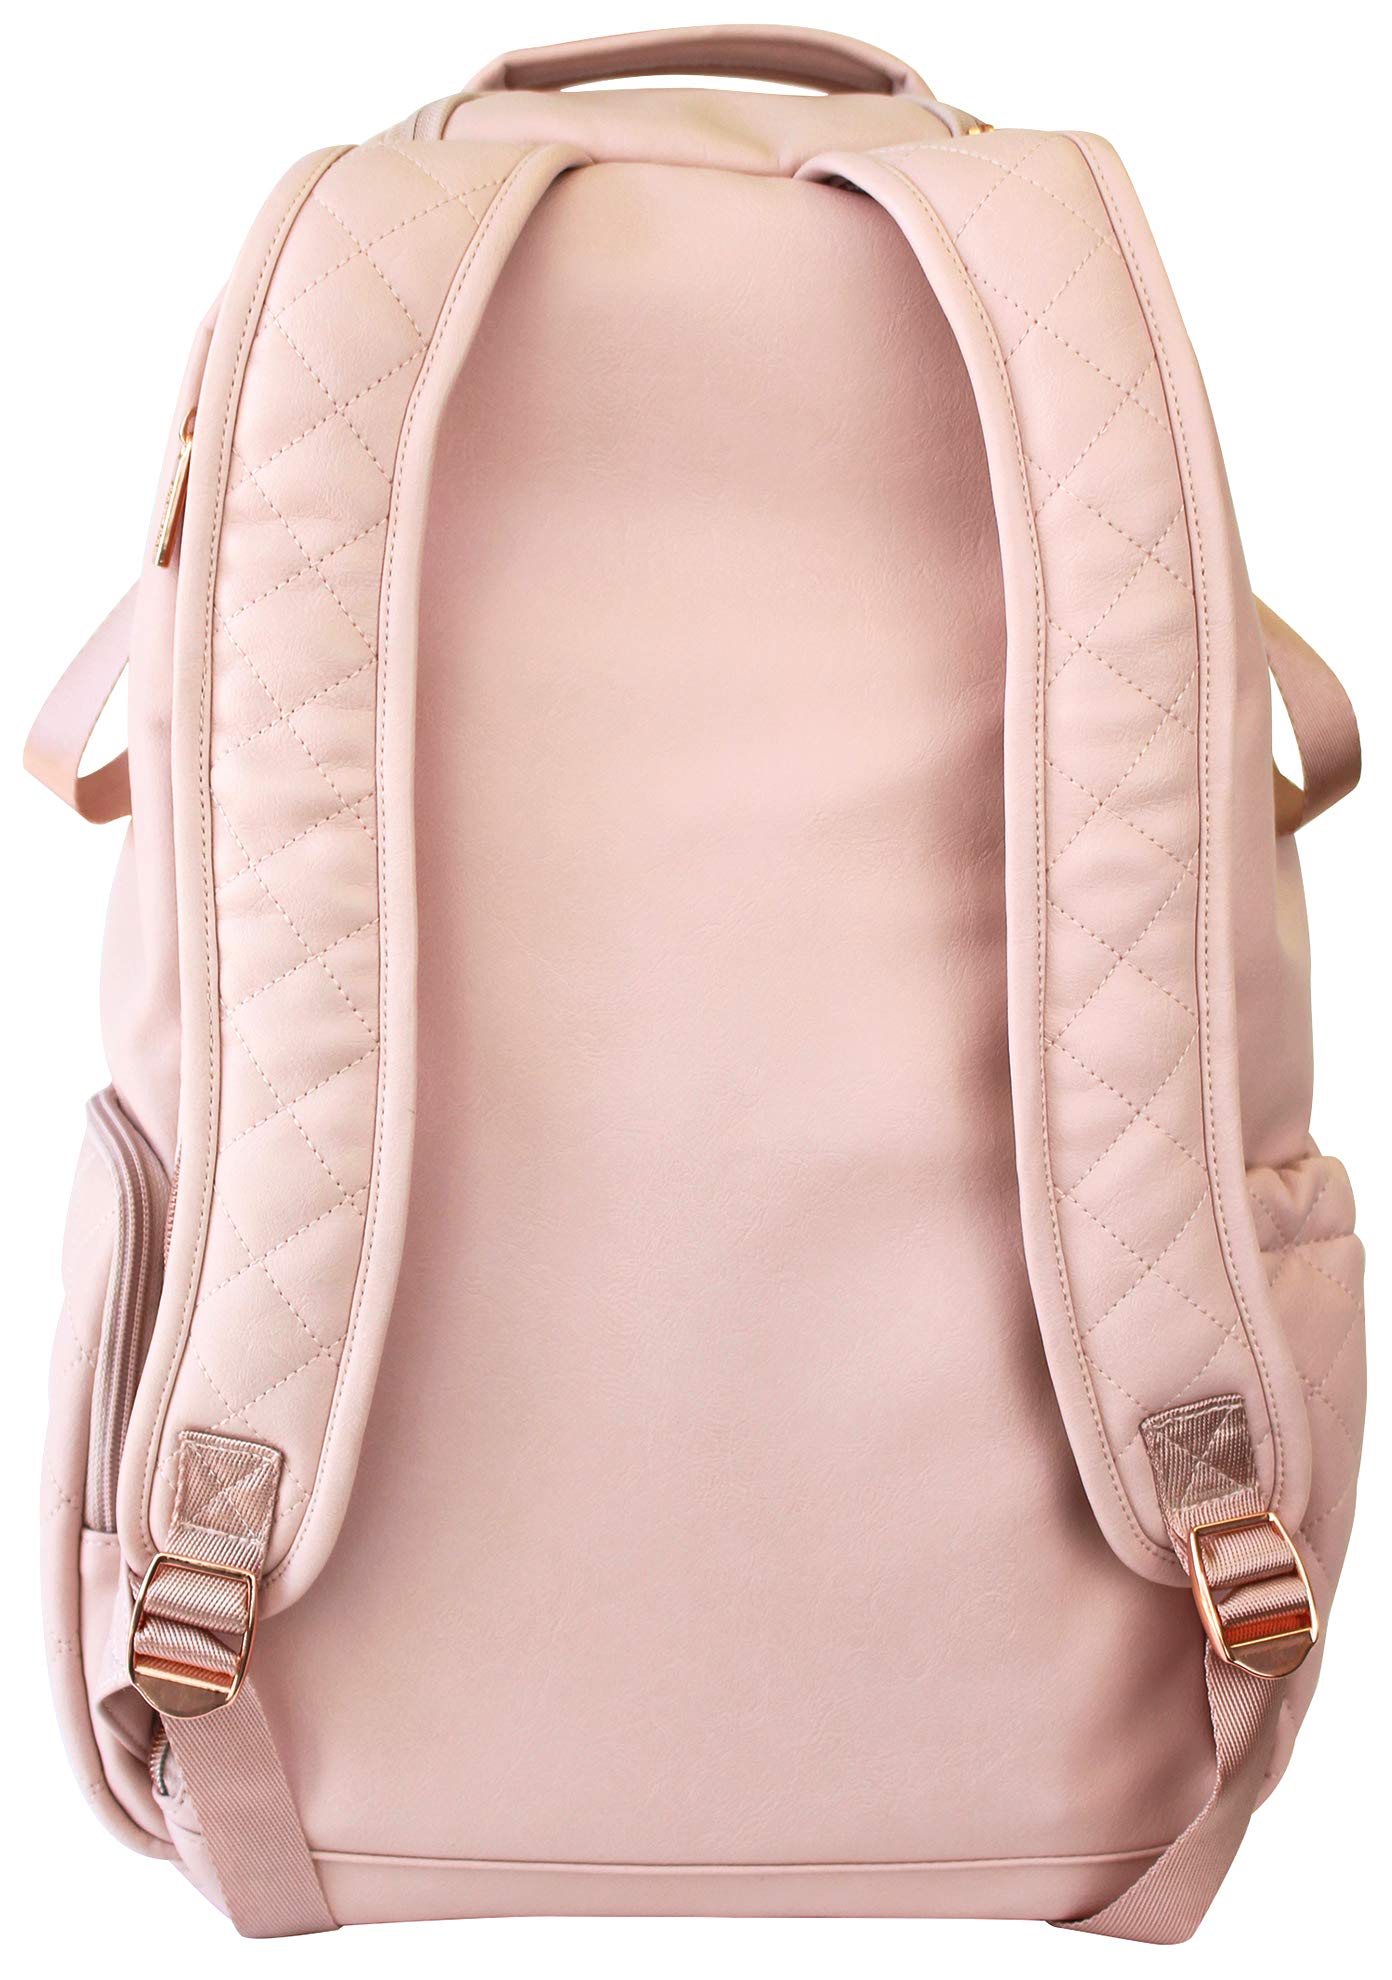 Itzy Ritzy Diaper Bag Backpack - Large Capacity Boss Backpack Diaper Bag Featuring Bottle Pockets, Changing Pad, Stroller Clips and Comfortable Backpack Straps, Blush